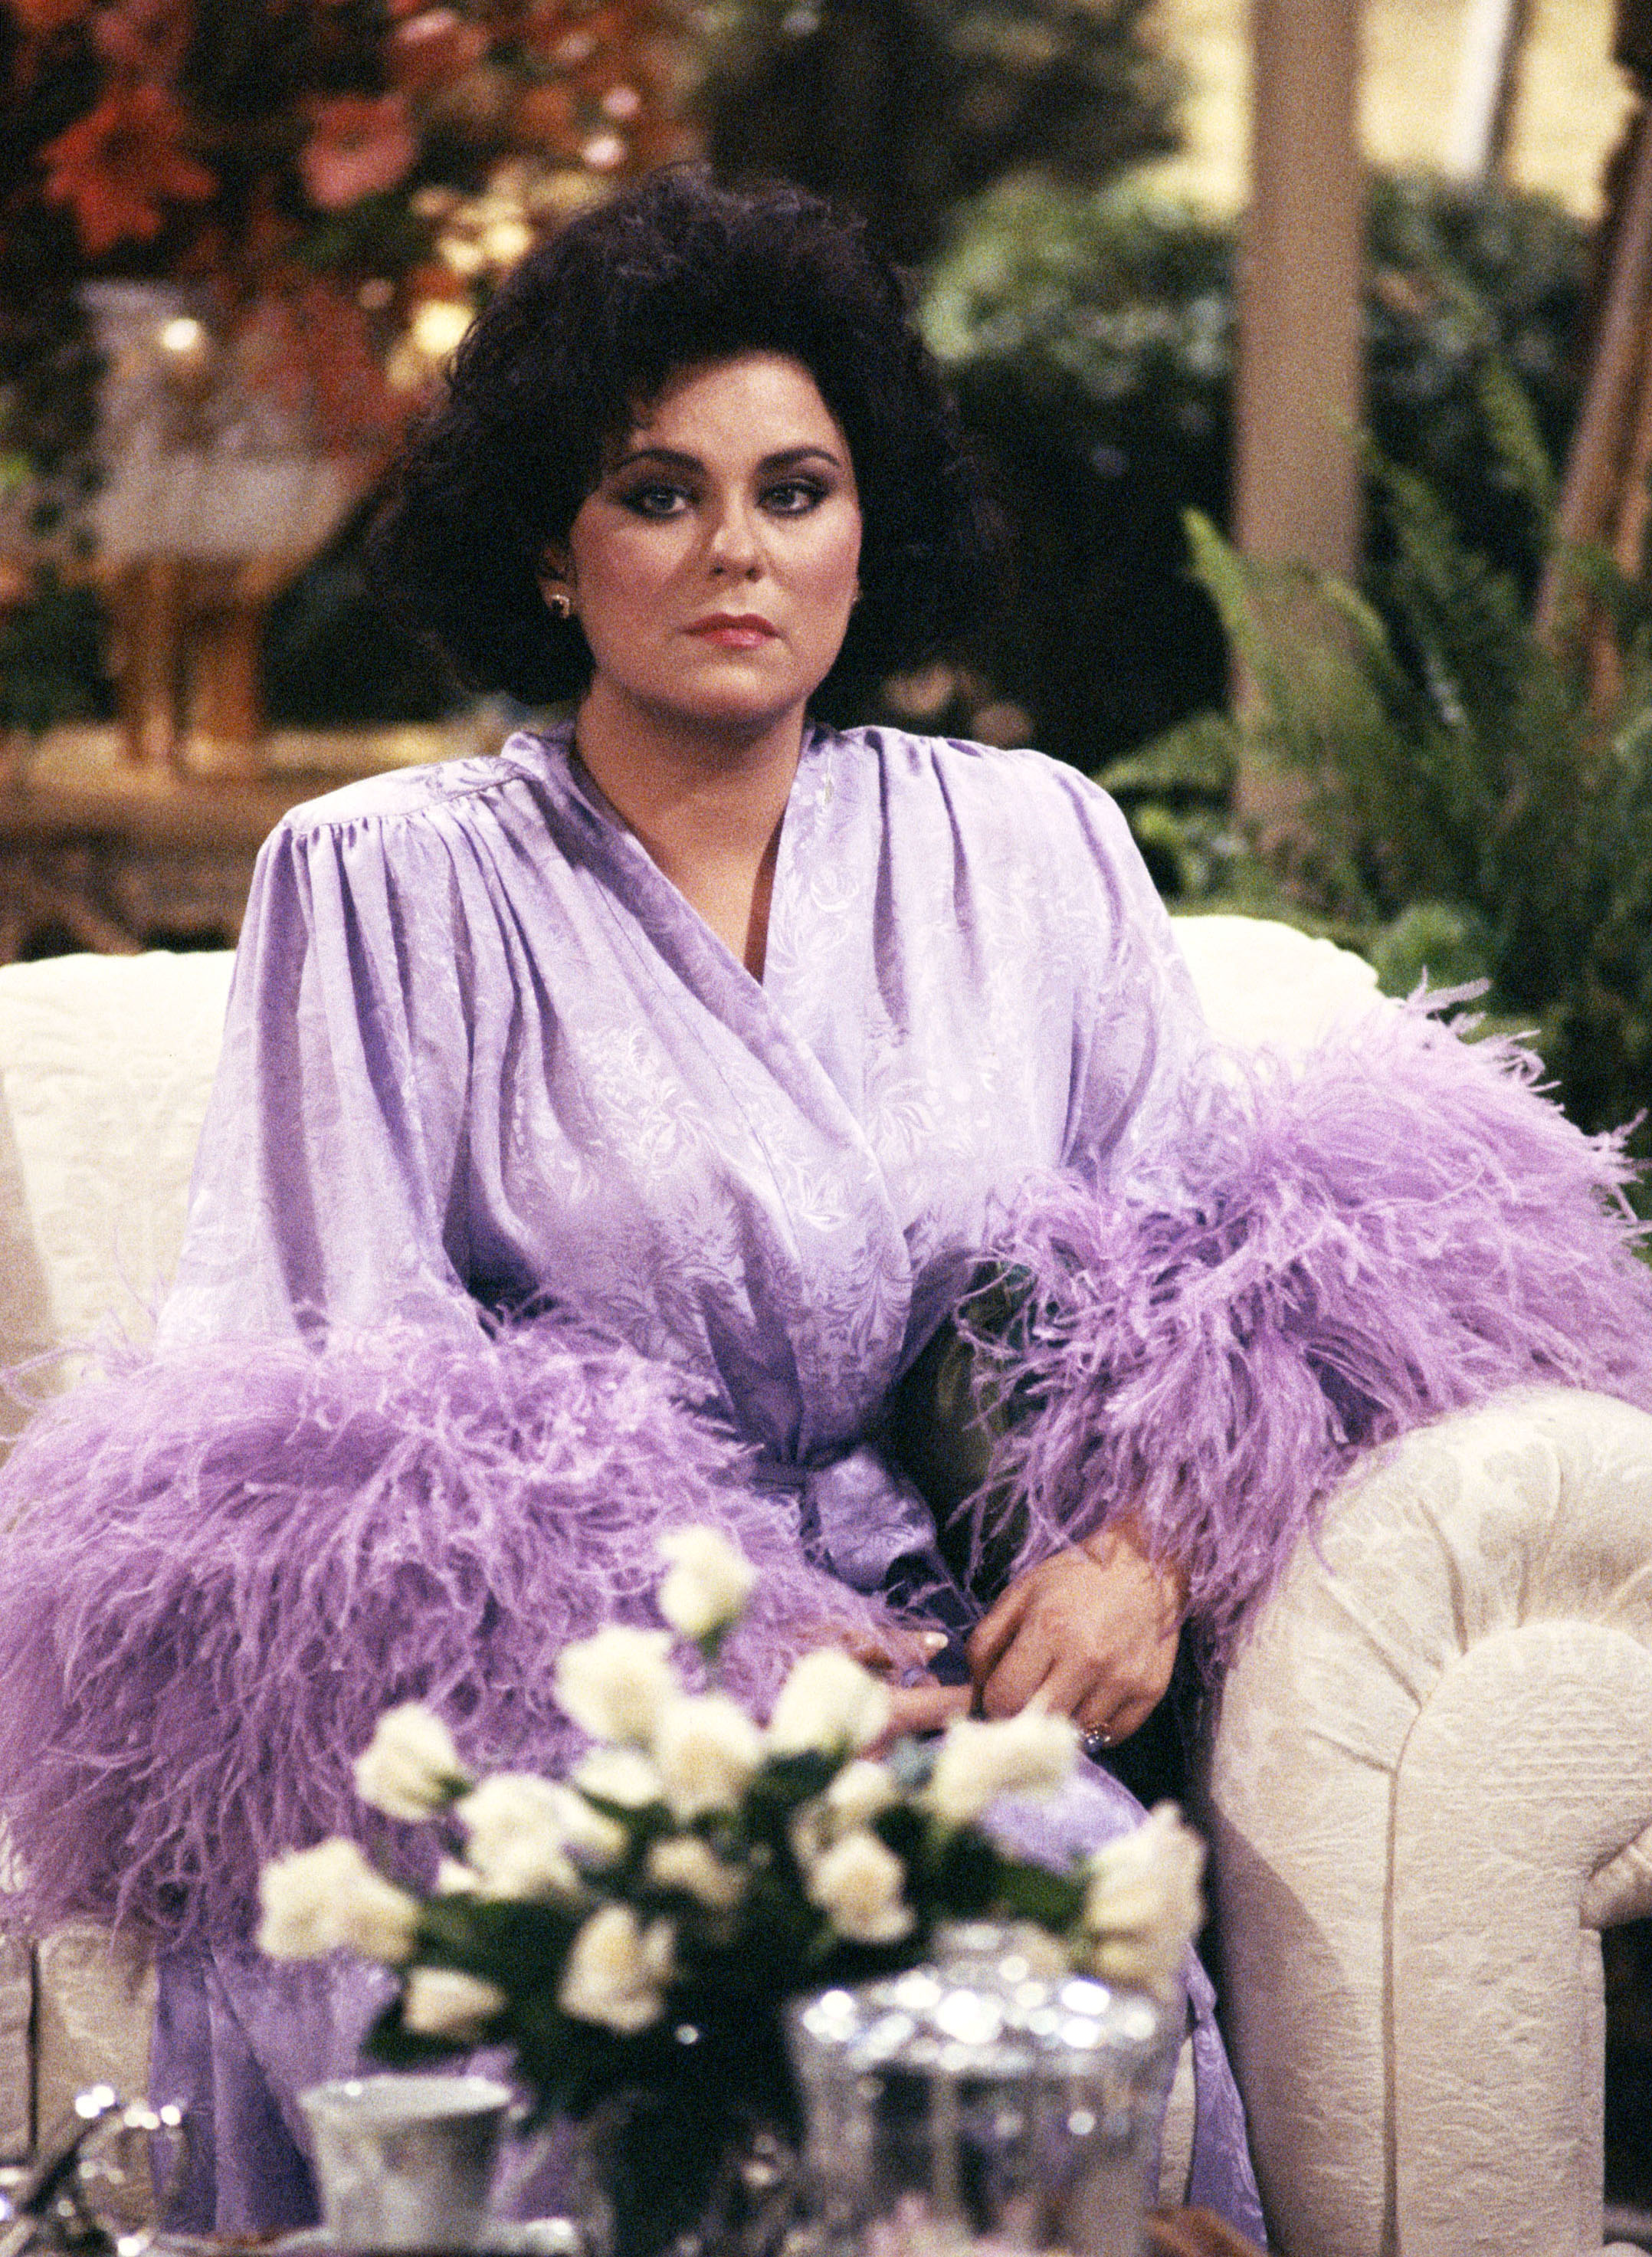 Delta Burke as Suzanne Sugarbaker on "Designing Women" in 1990 | Source: Getty Images